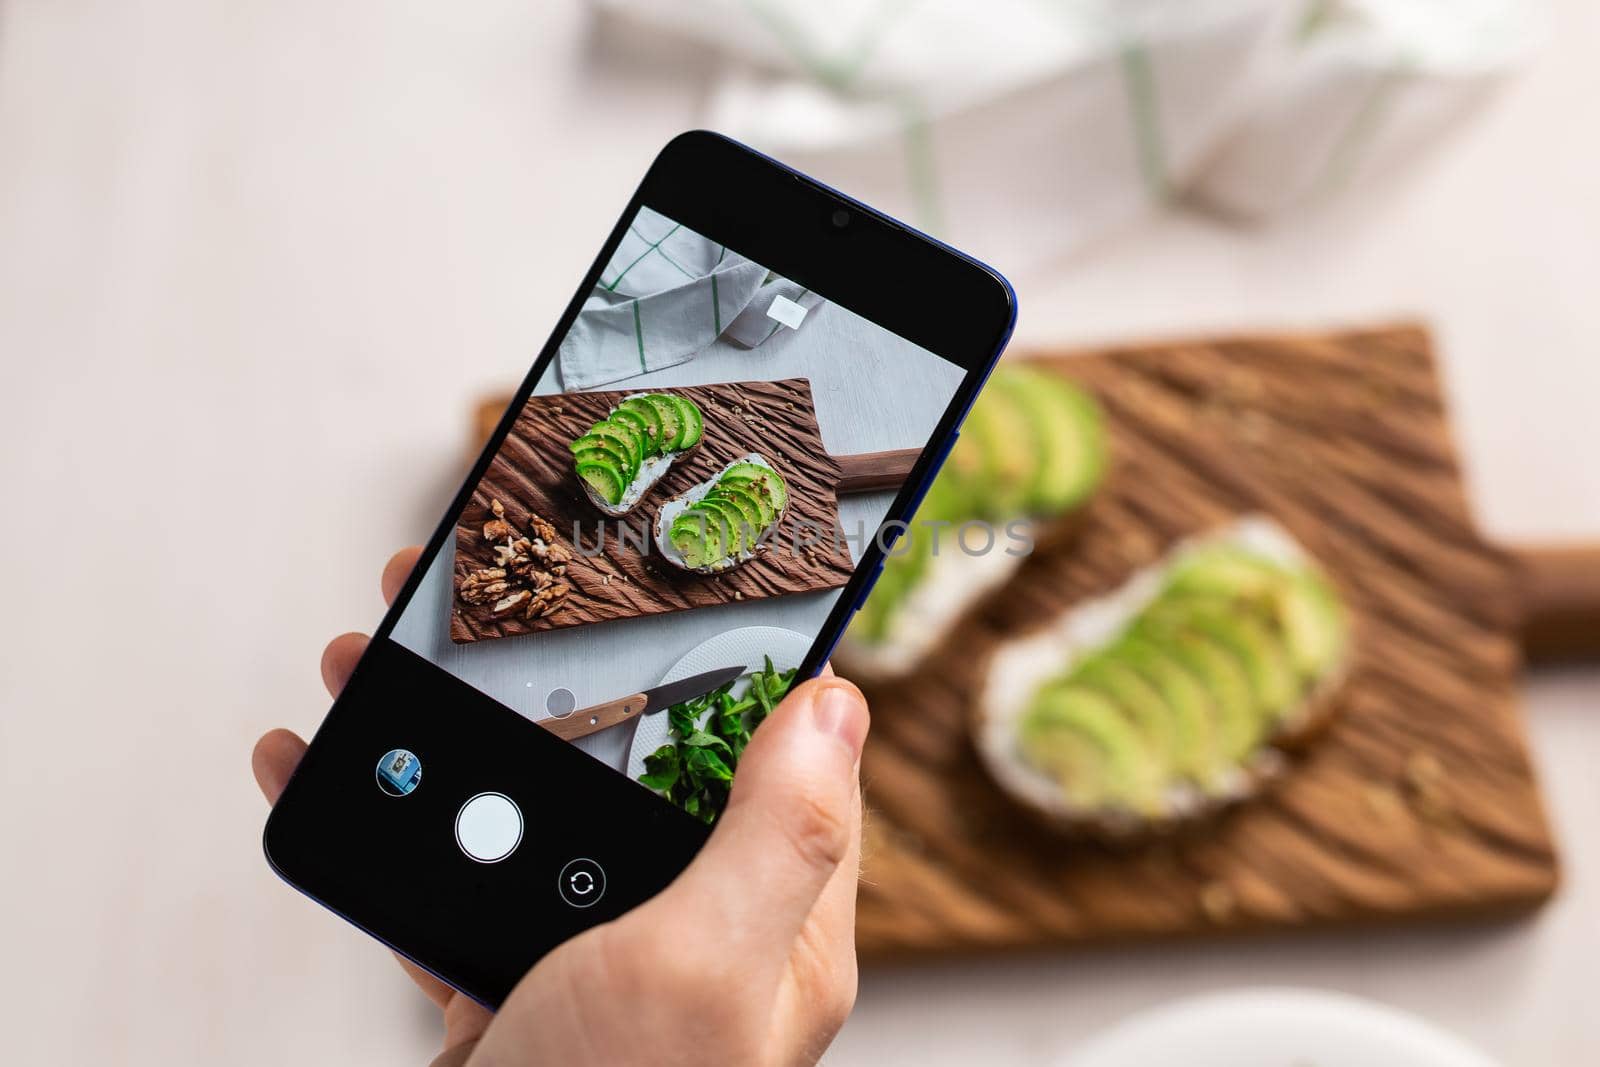 Hands take pictures on smartphone of two beautiful healthy sour cream and avocado sandwiches lying on board on the table. Social media and food